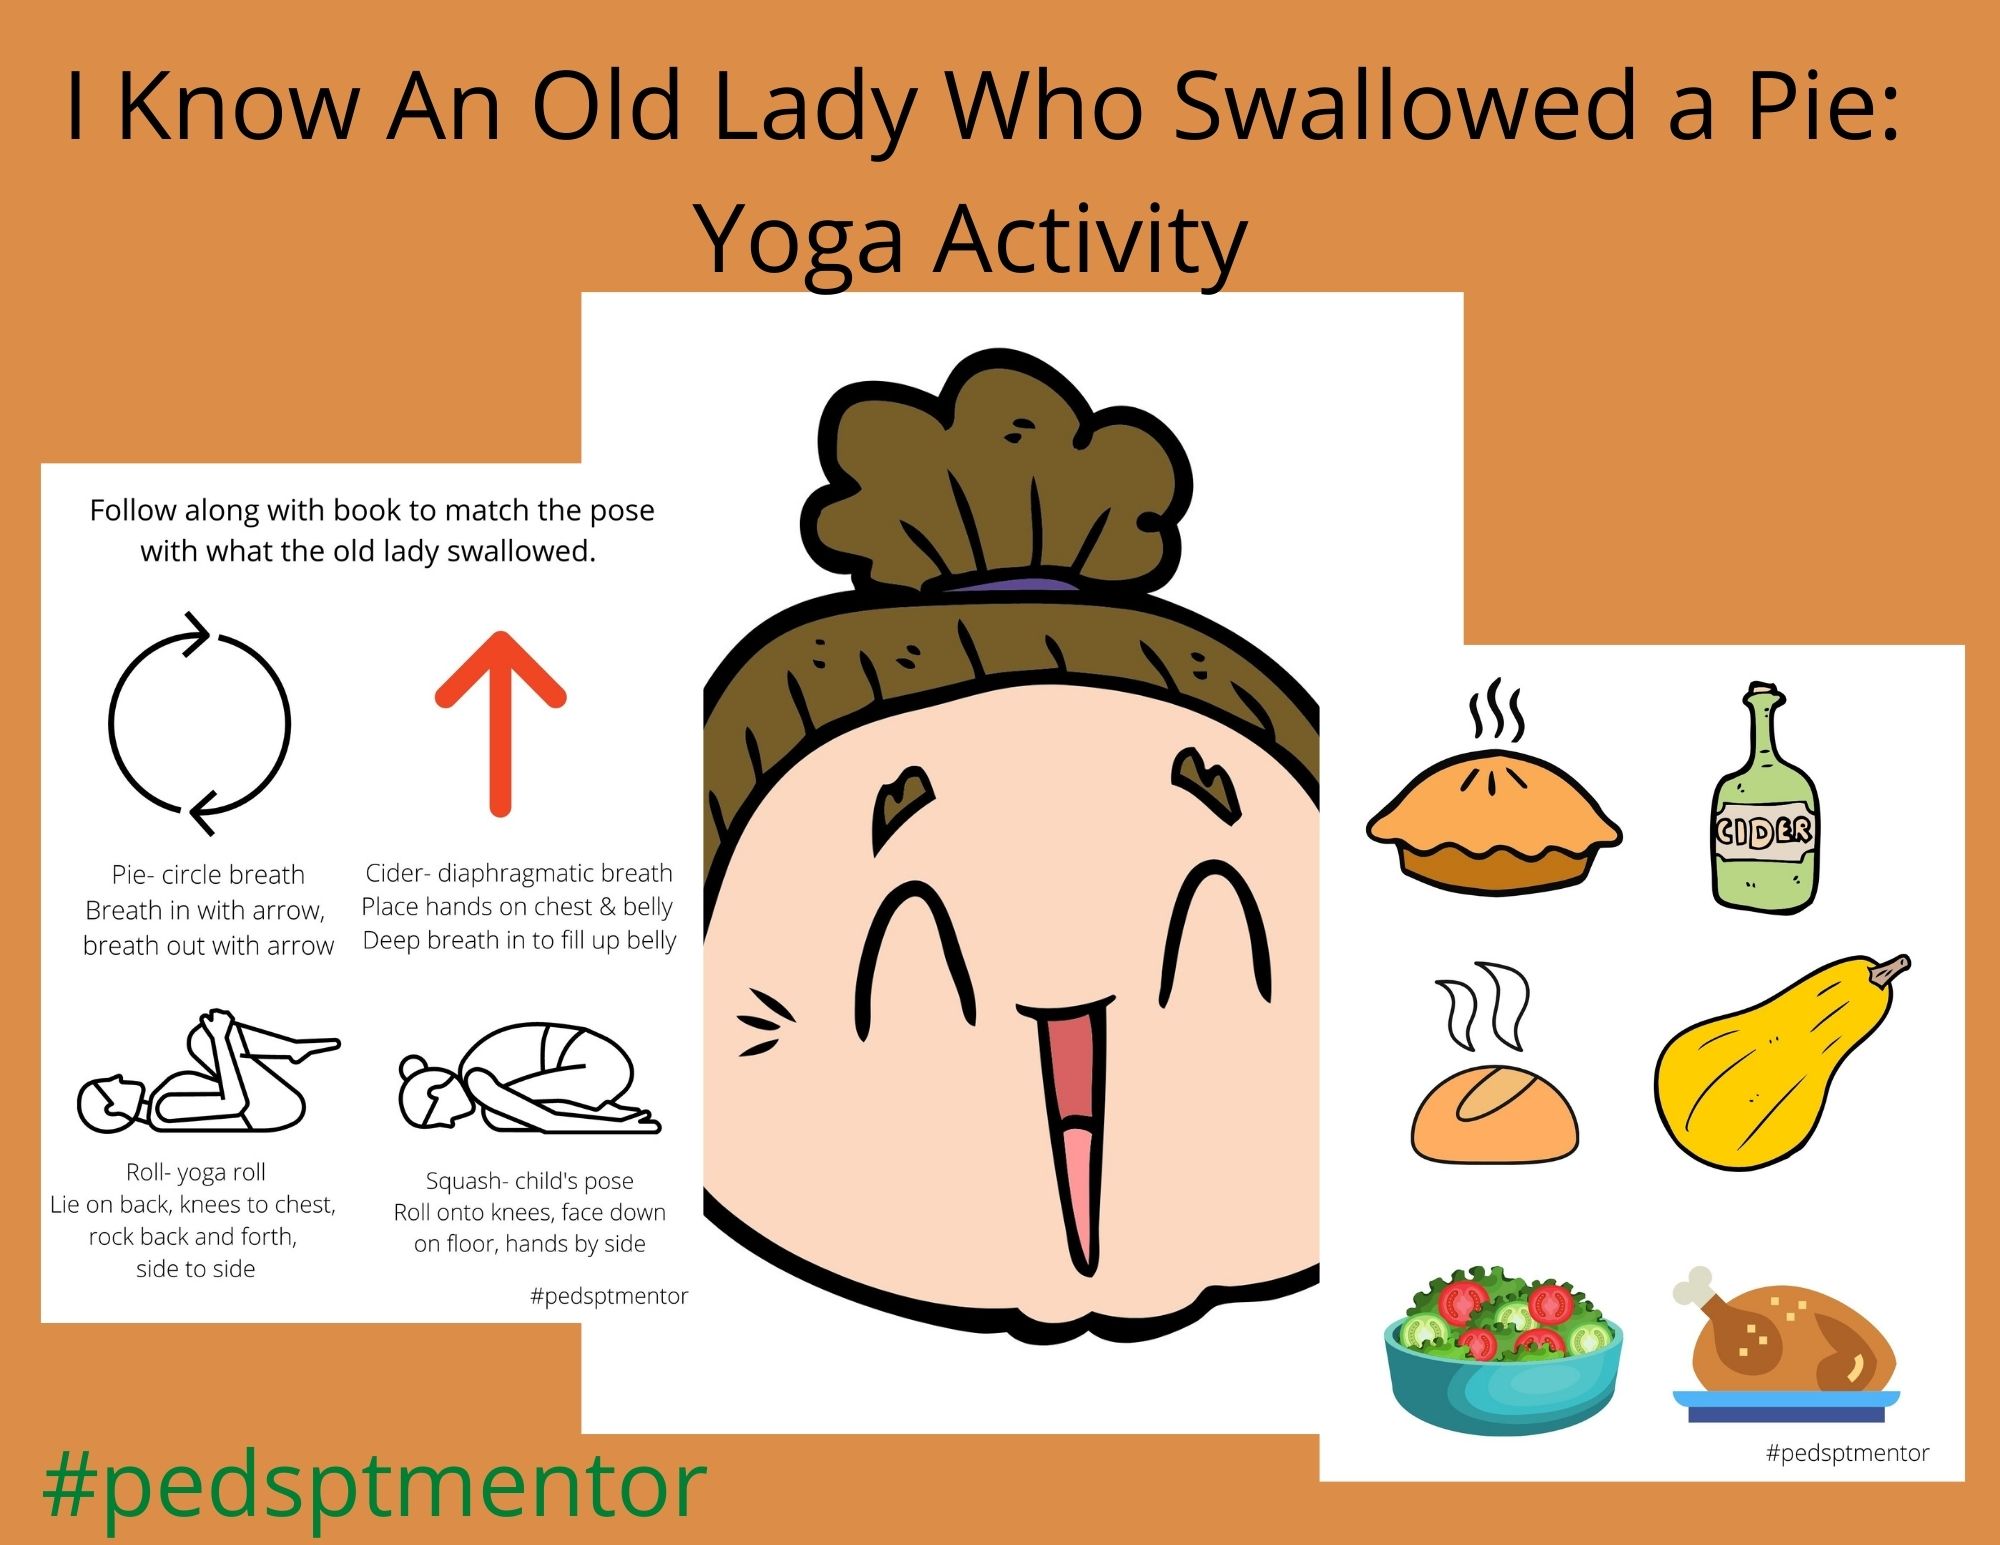 "I Know An Old Lady Who Swallowed a Pie" Yoga Activity image